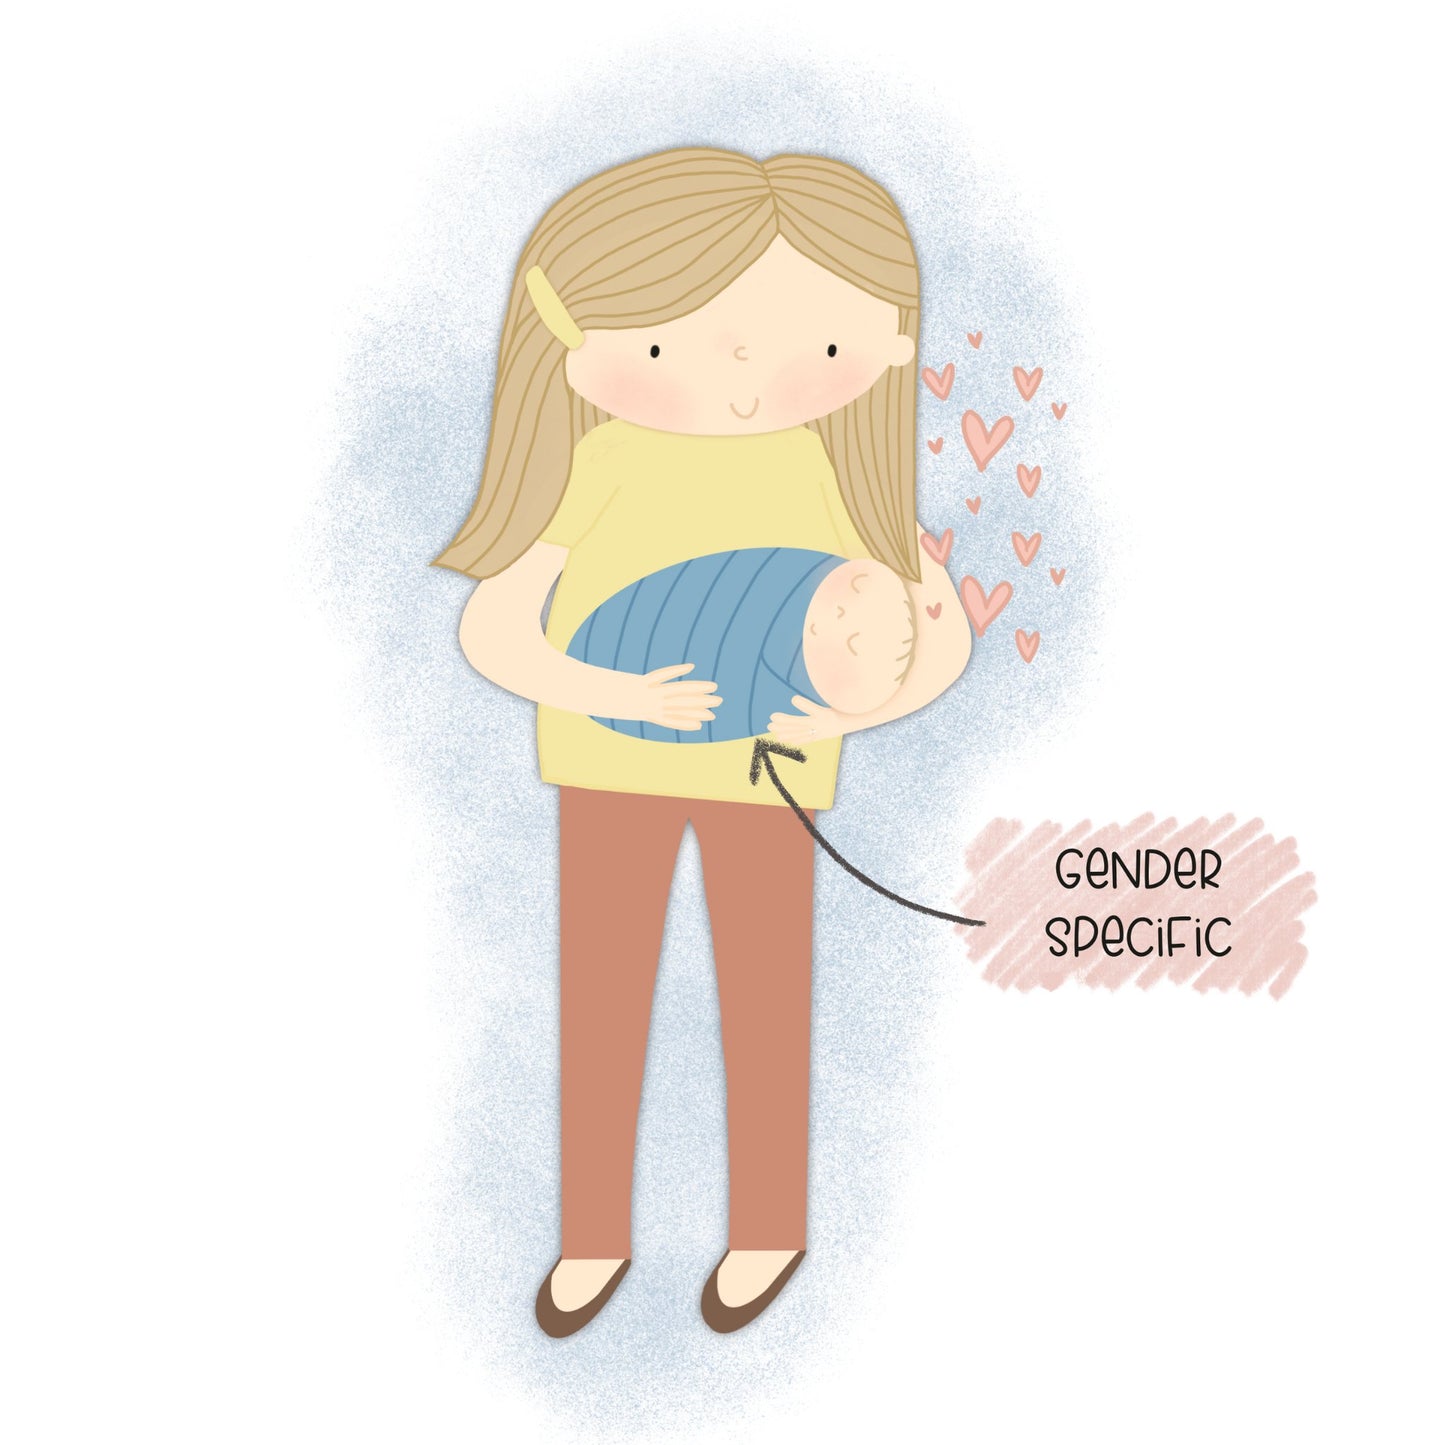 Example of the gender-specific colors of the baby in the blanket illustration in the self-published personalized gift- a children’s picture book called “I’m Your Mommy”